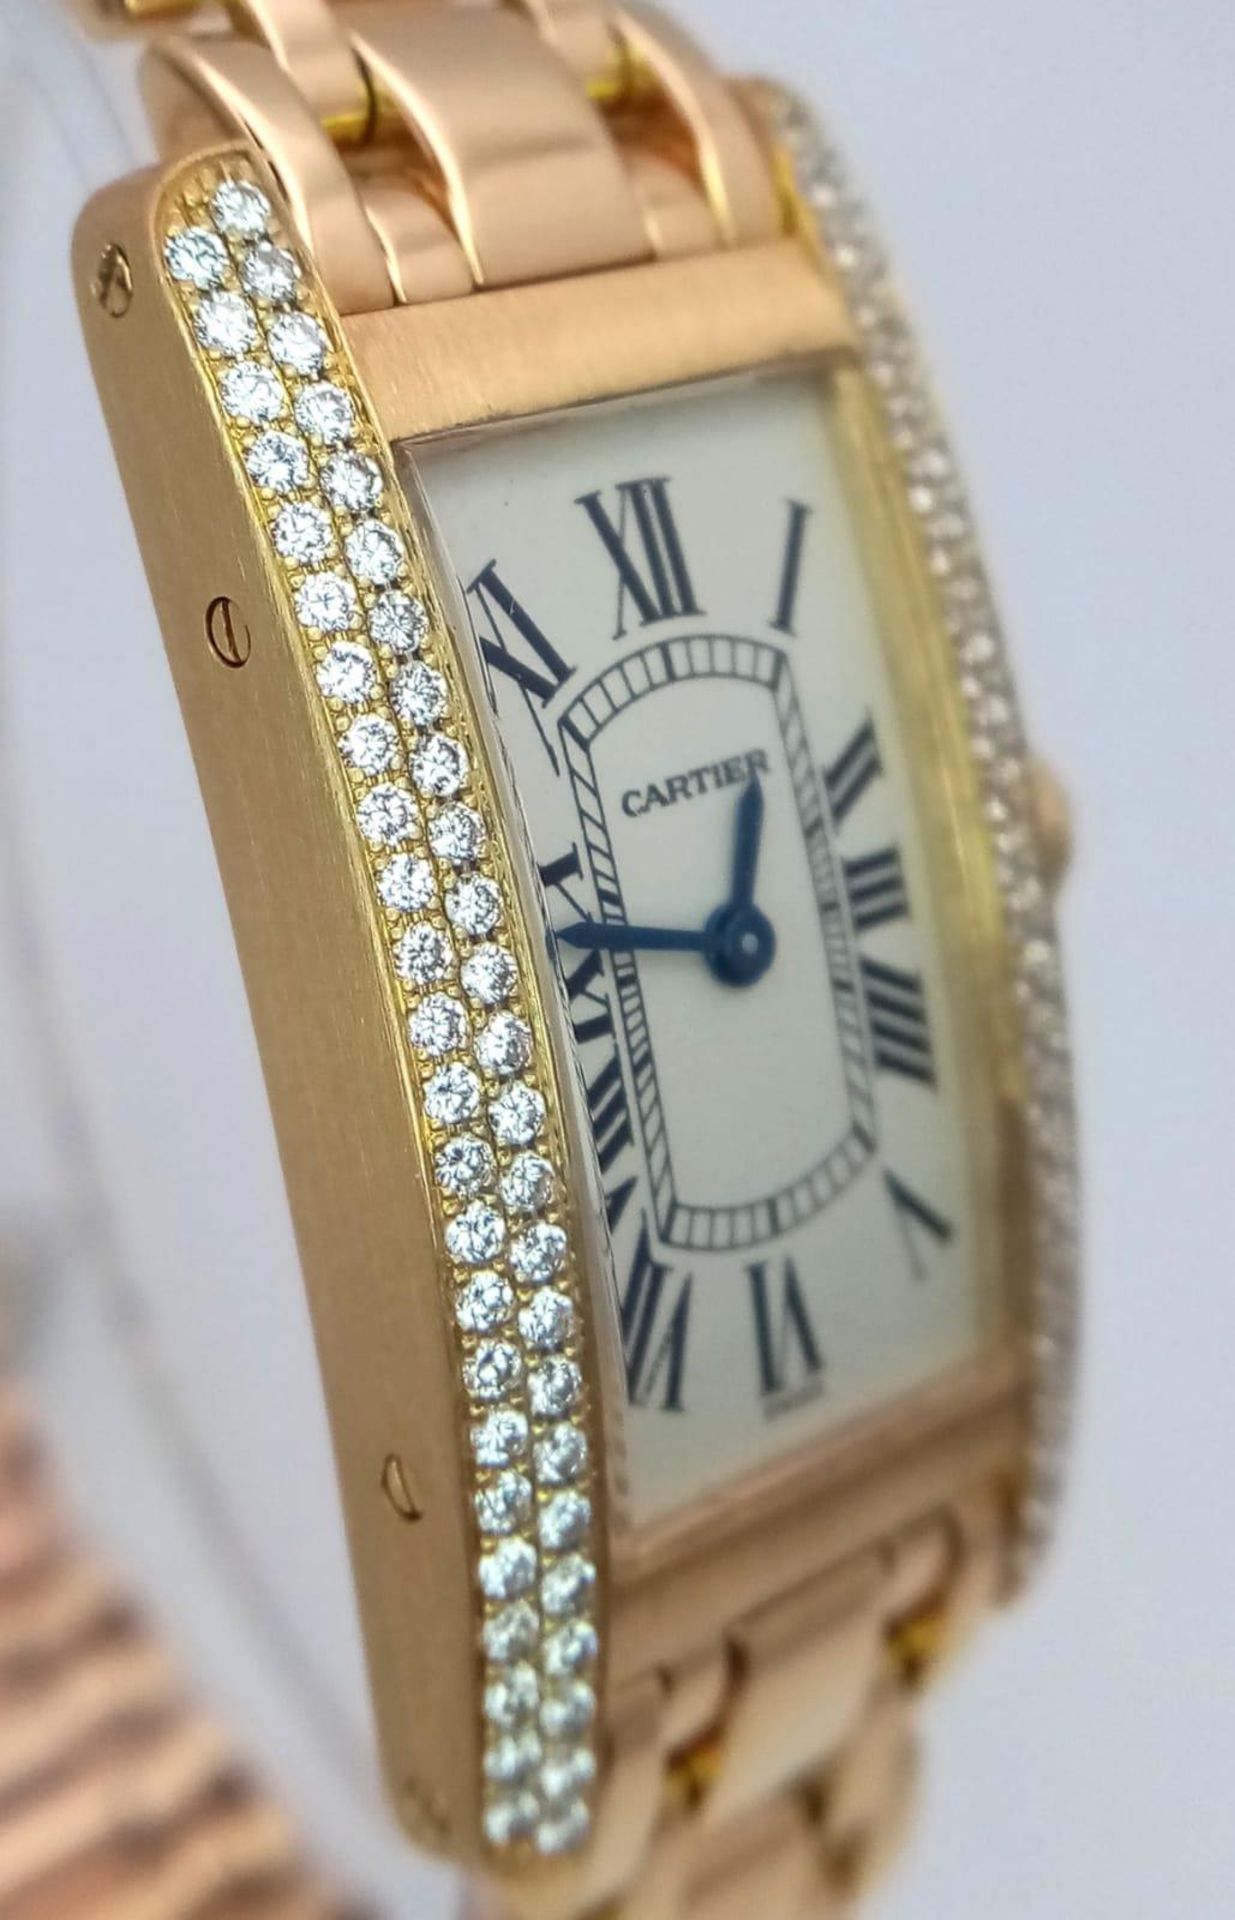 An 18K Gold and Diamond Cartier Tank Americaine Ladies Watch. 18K gold bracelet and case - 19mm - Image 3 of 8